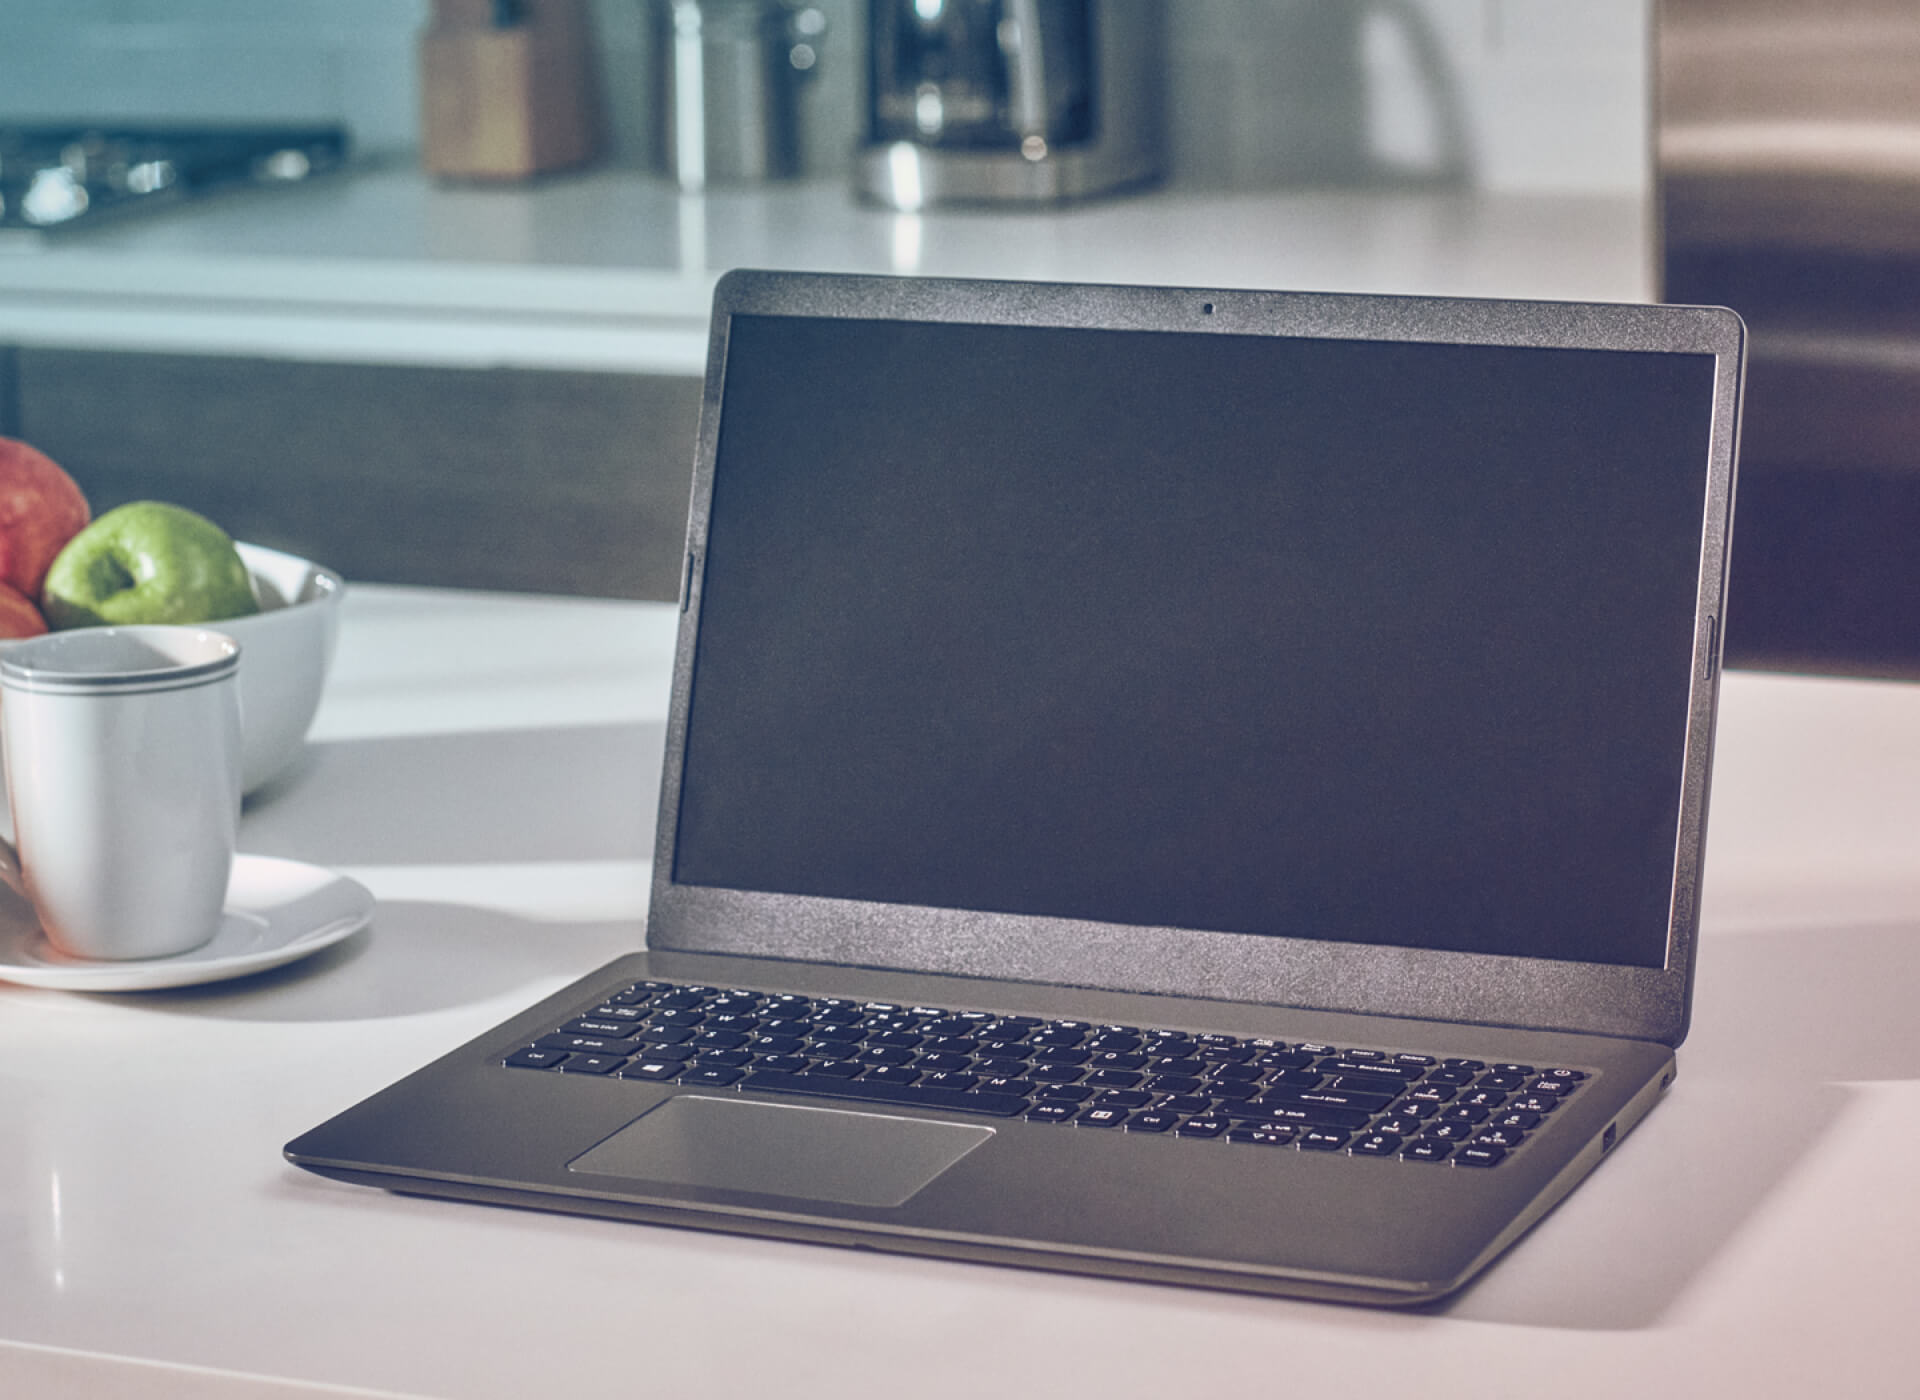 A laptop on a kitchen counter.